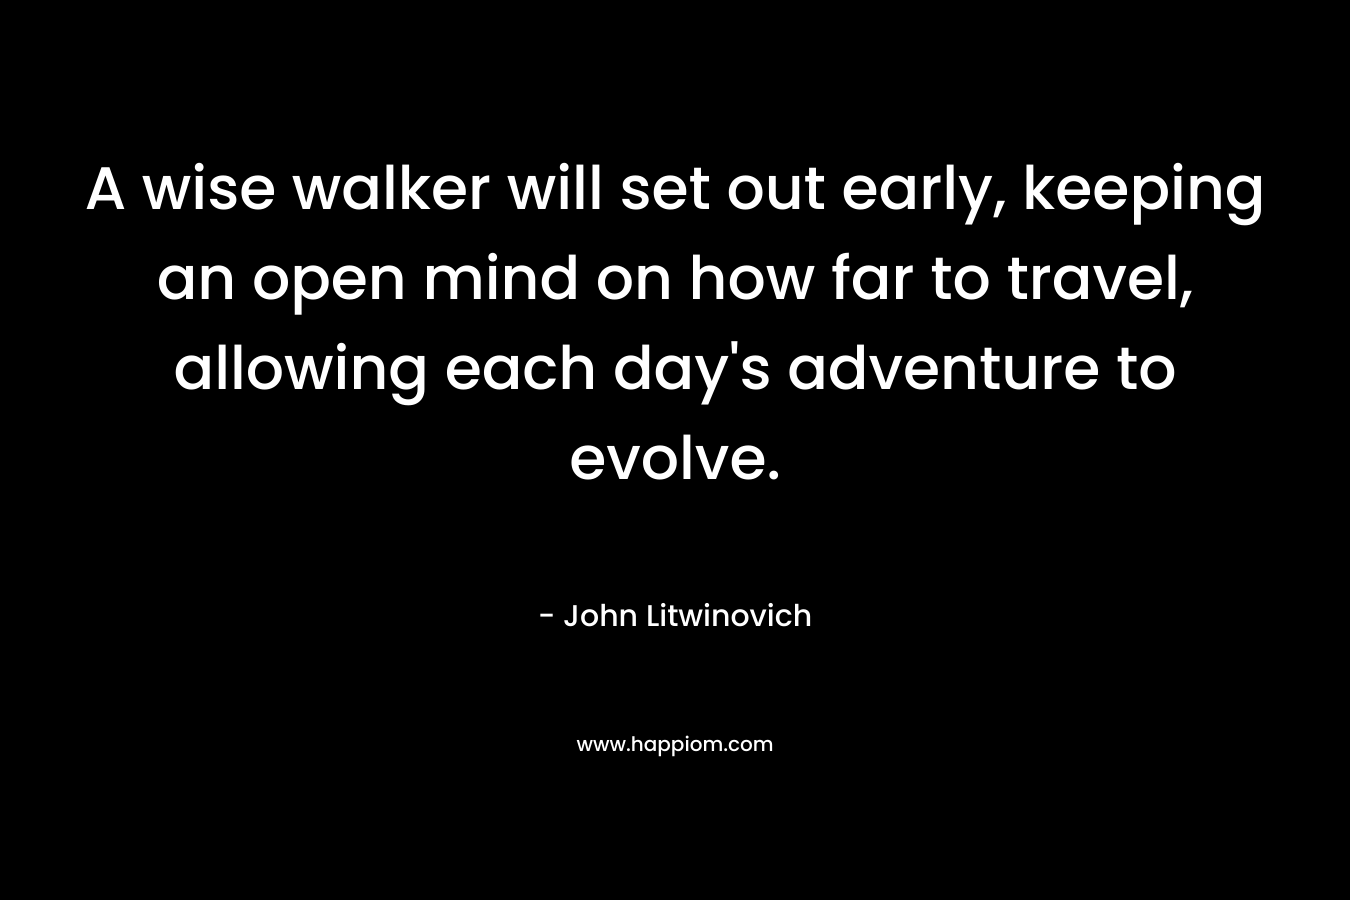 A wise walker will set out early, keeping an open mind on how far to travel, allowing each day’s adventure to evolve. – John Litwinovich